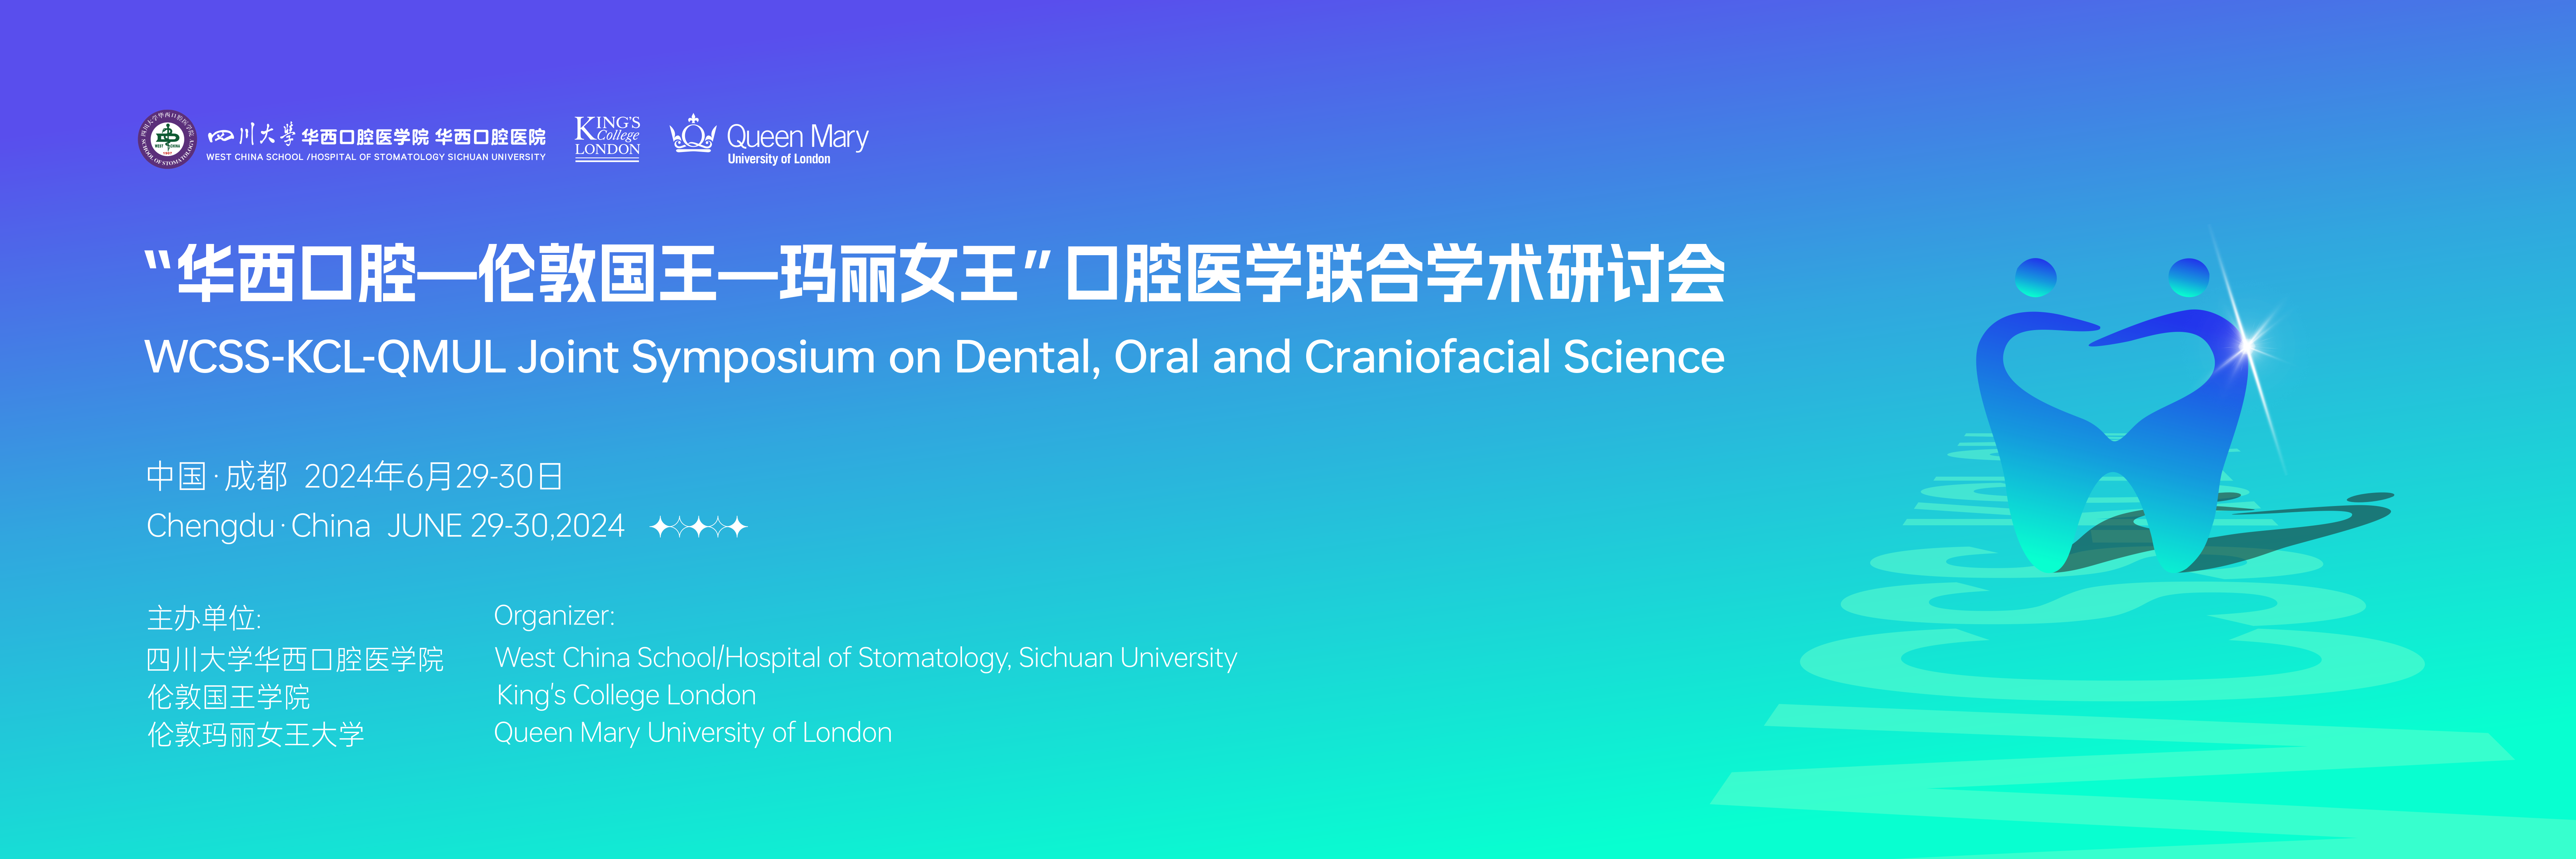 WCSS-KCL-QMUL Joint Symposium on Dental, Oral and Craniofacial Science